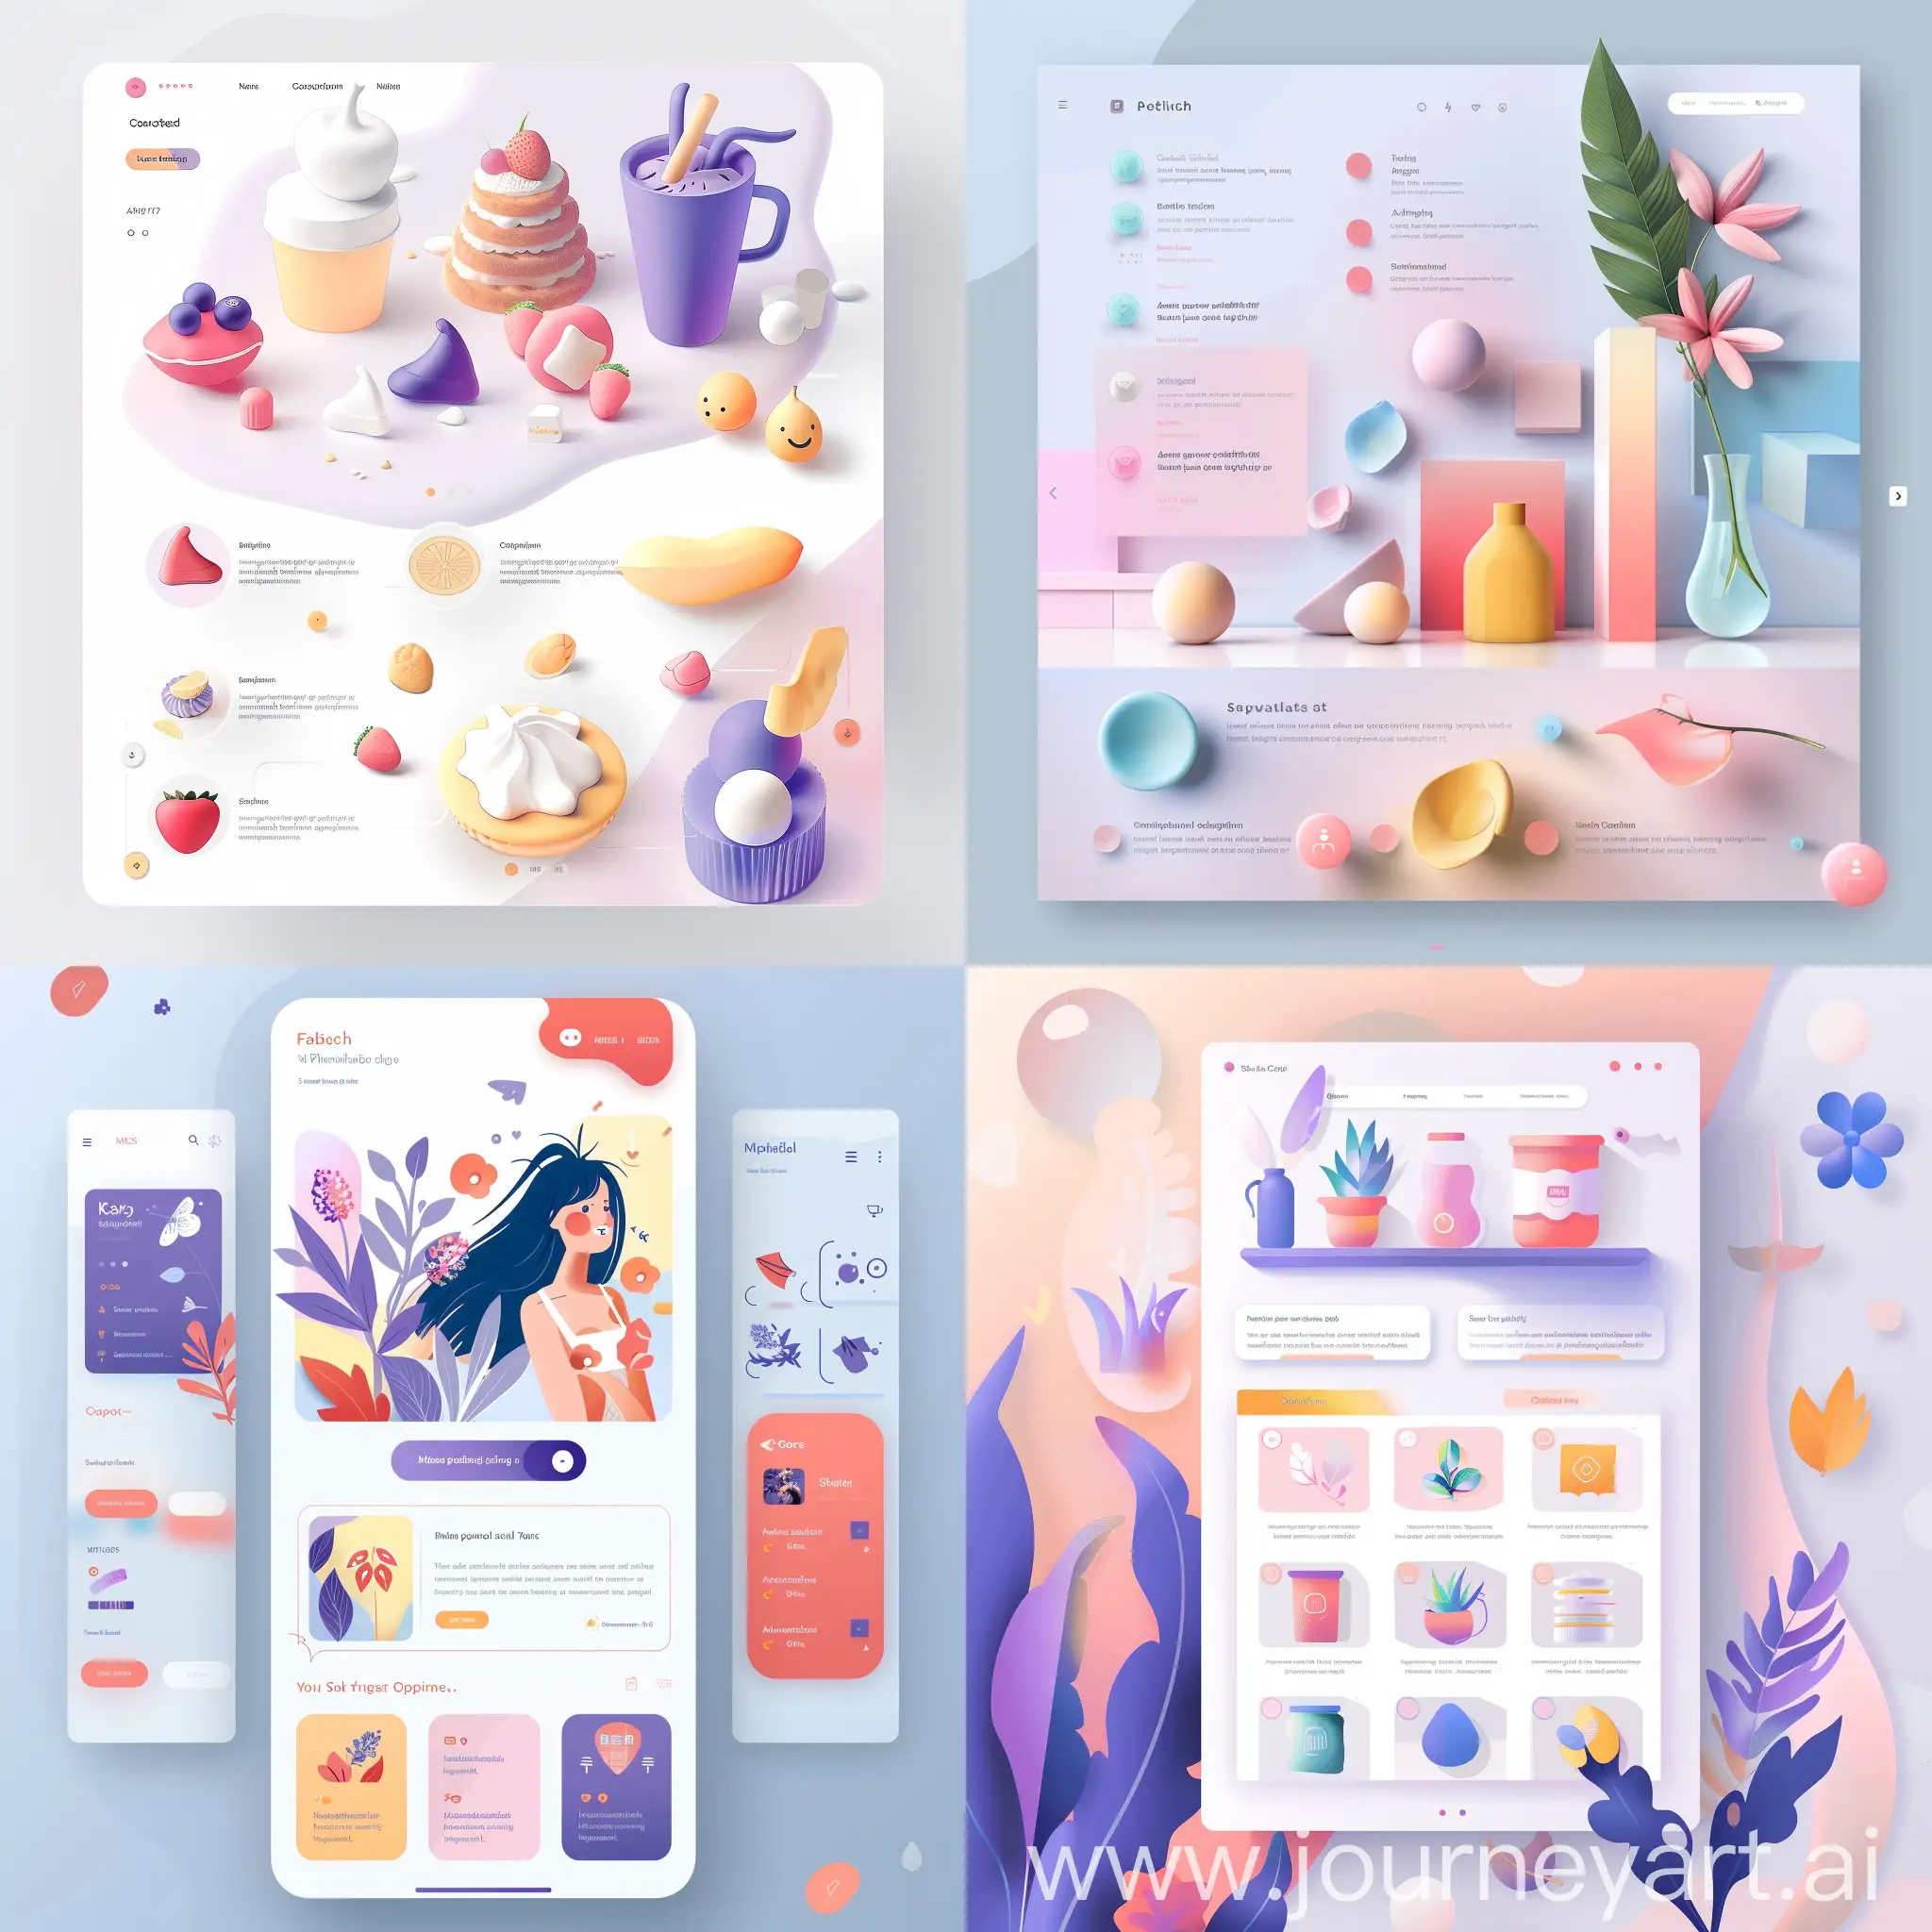 Stylized-Product-Features-Display-with-Icons-and-Vibrant-Colors